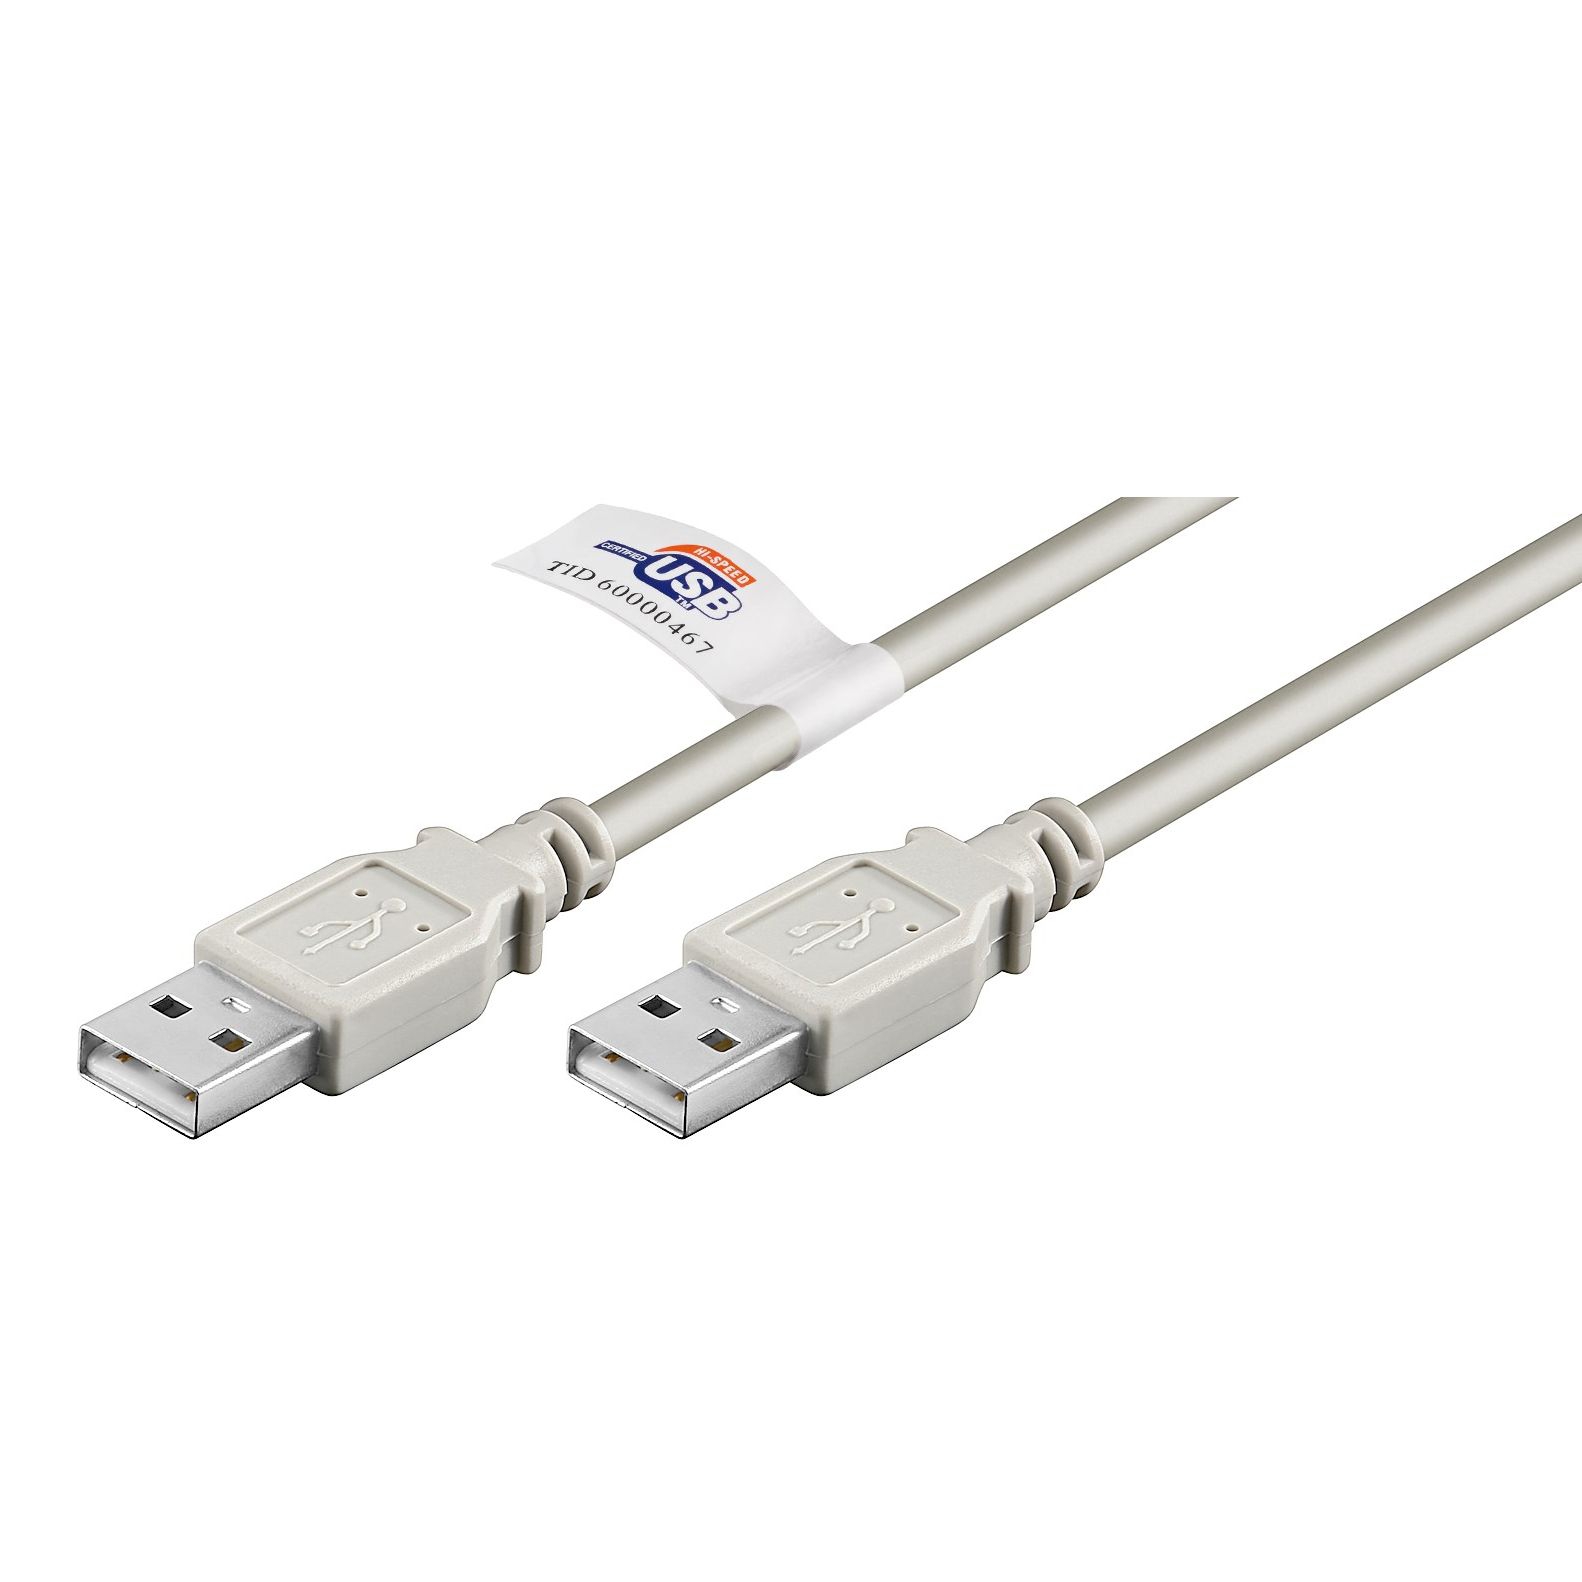 Special USB 2.0 cable with 2x plug USB A male 2m certified